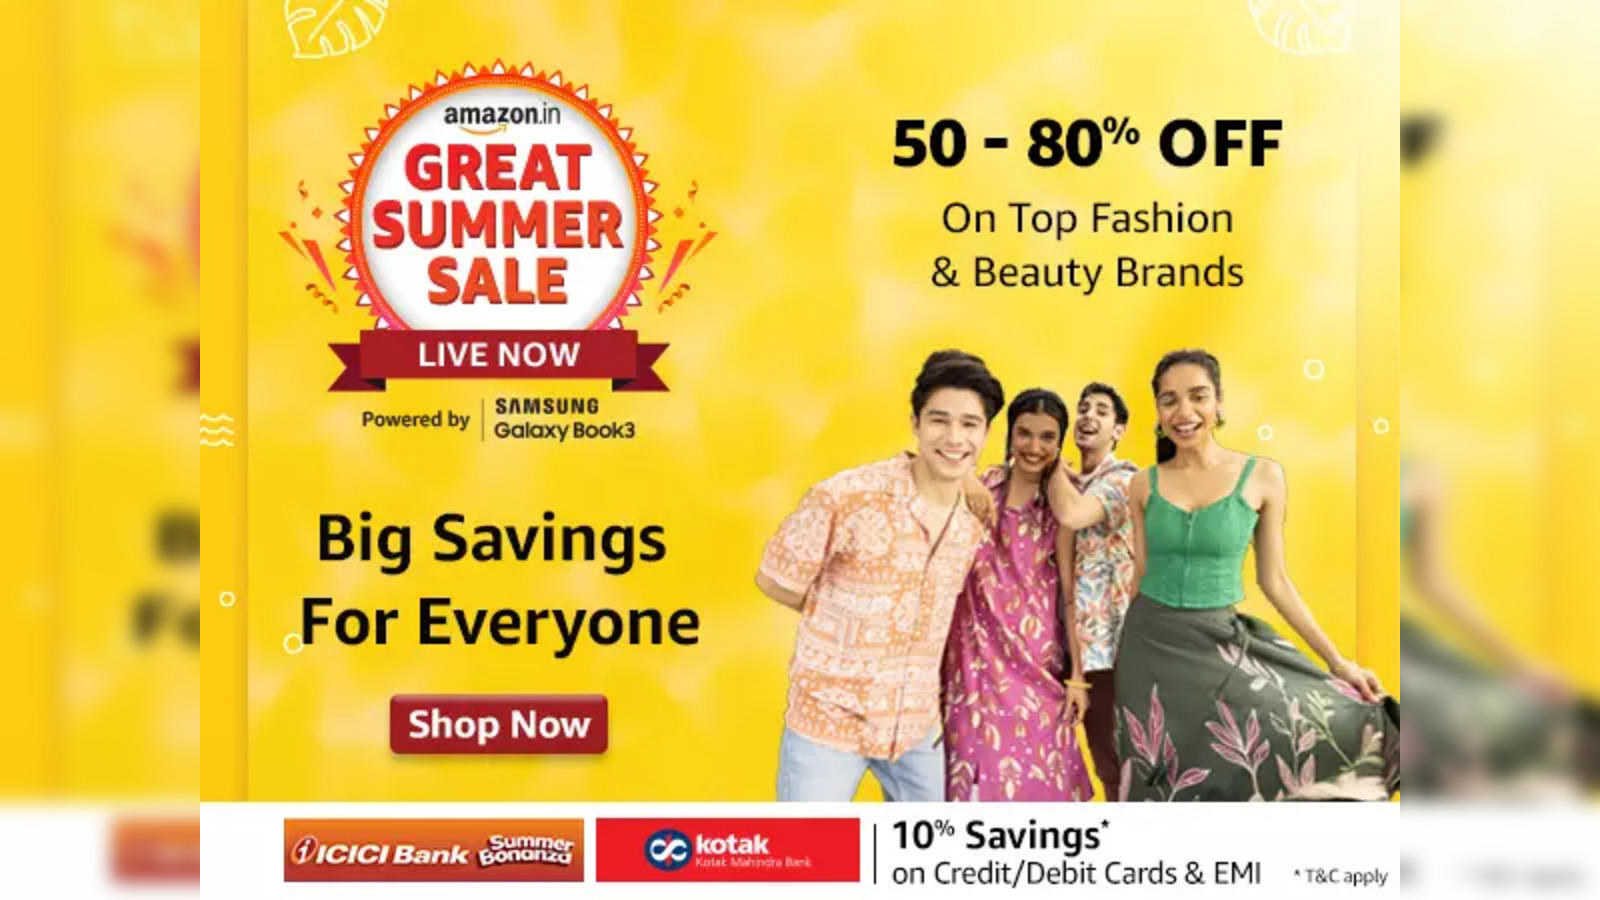 Buy Shorts For Men Online In India at Upto 50% Off - Beyoung